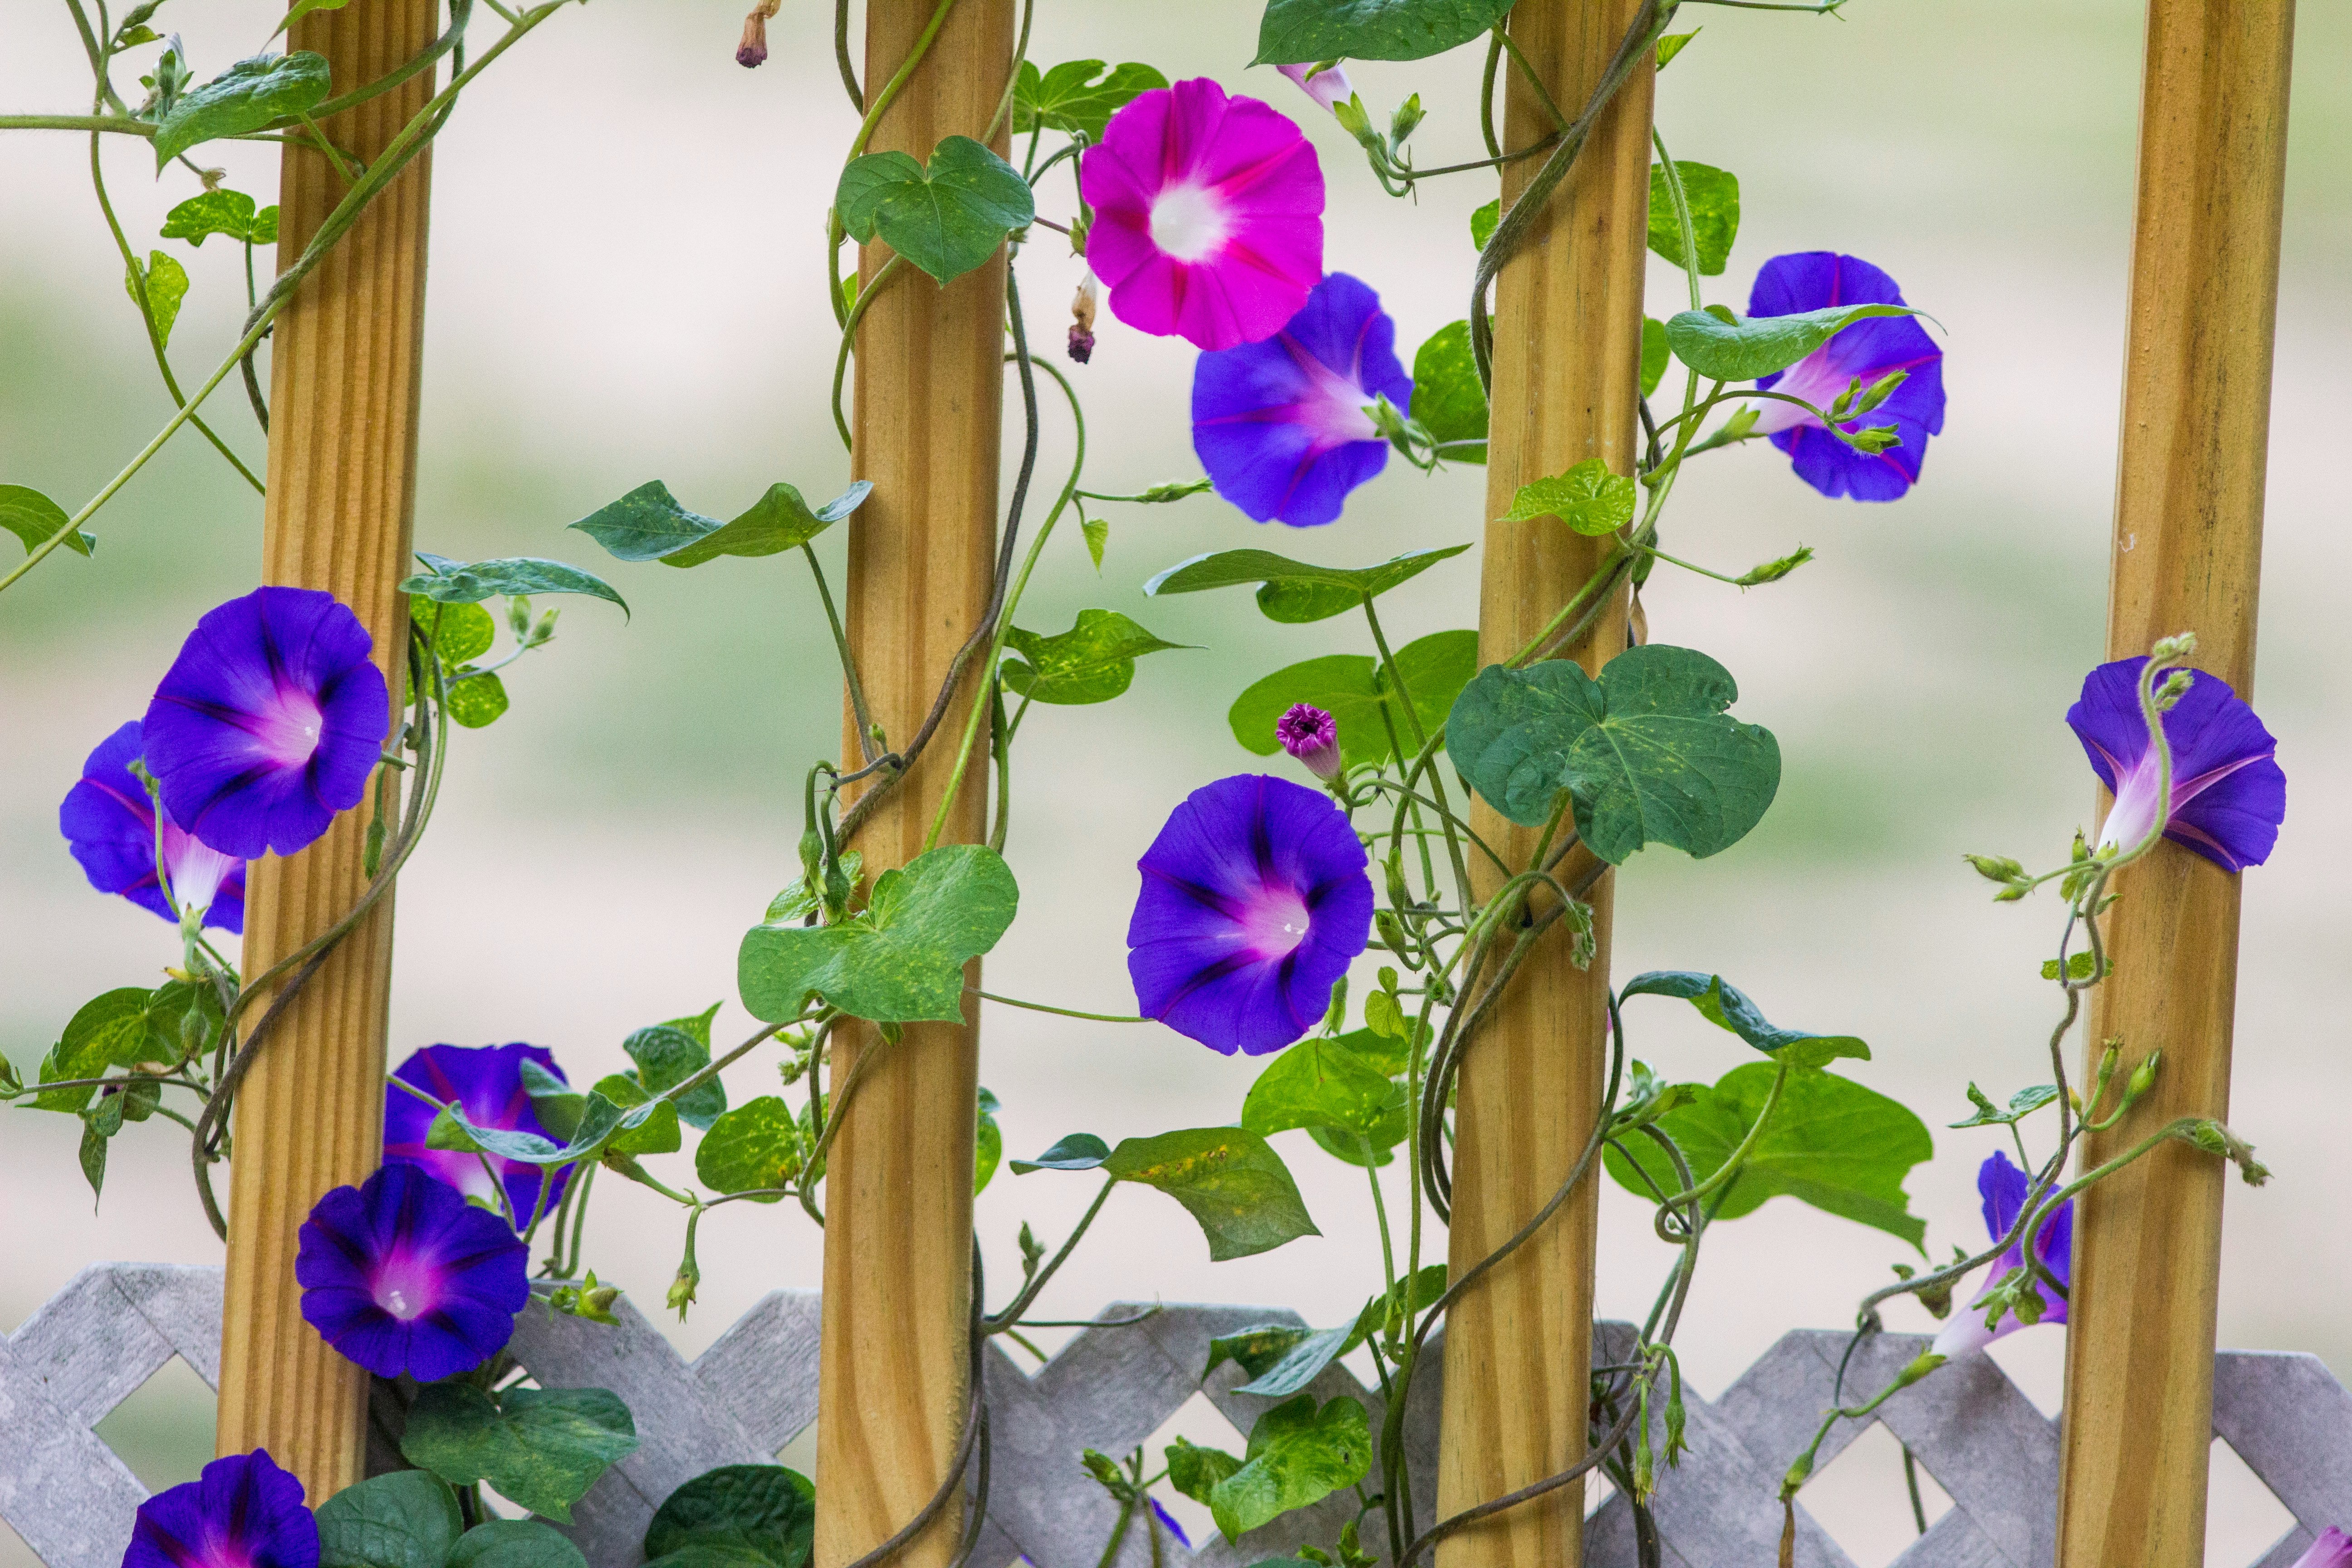 morning glories take over the decks woodwork. the vines wrap arond rail spindles with numerous blossoms daily. A beautiful array of colors.